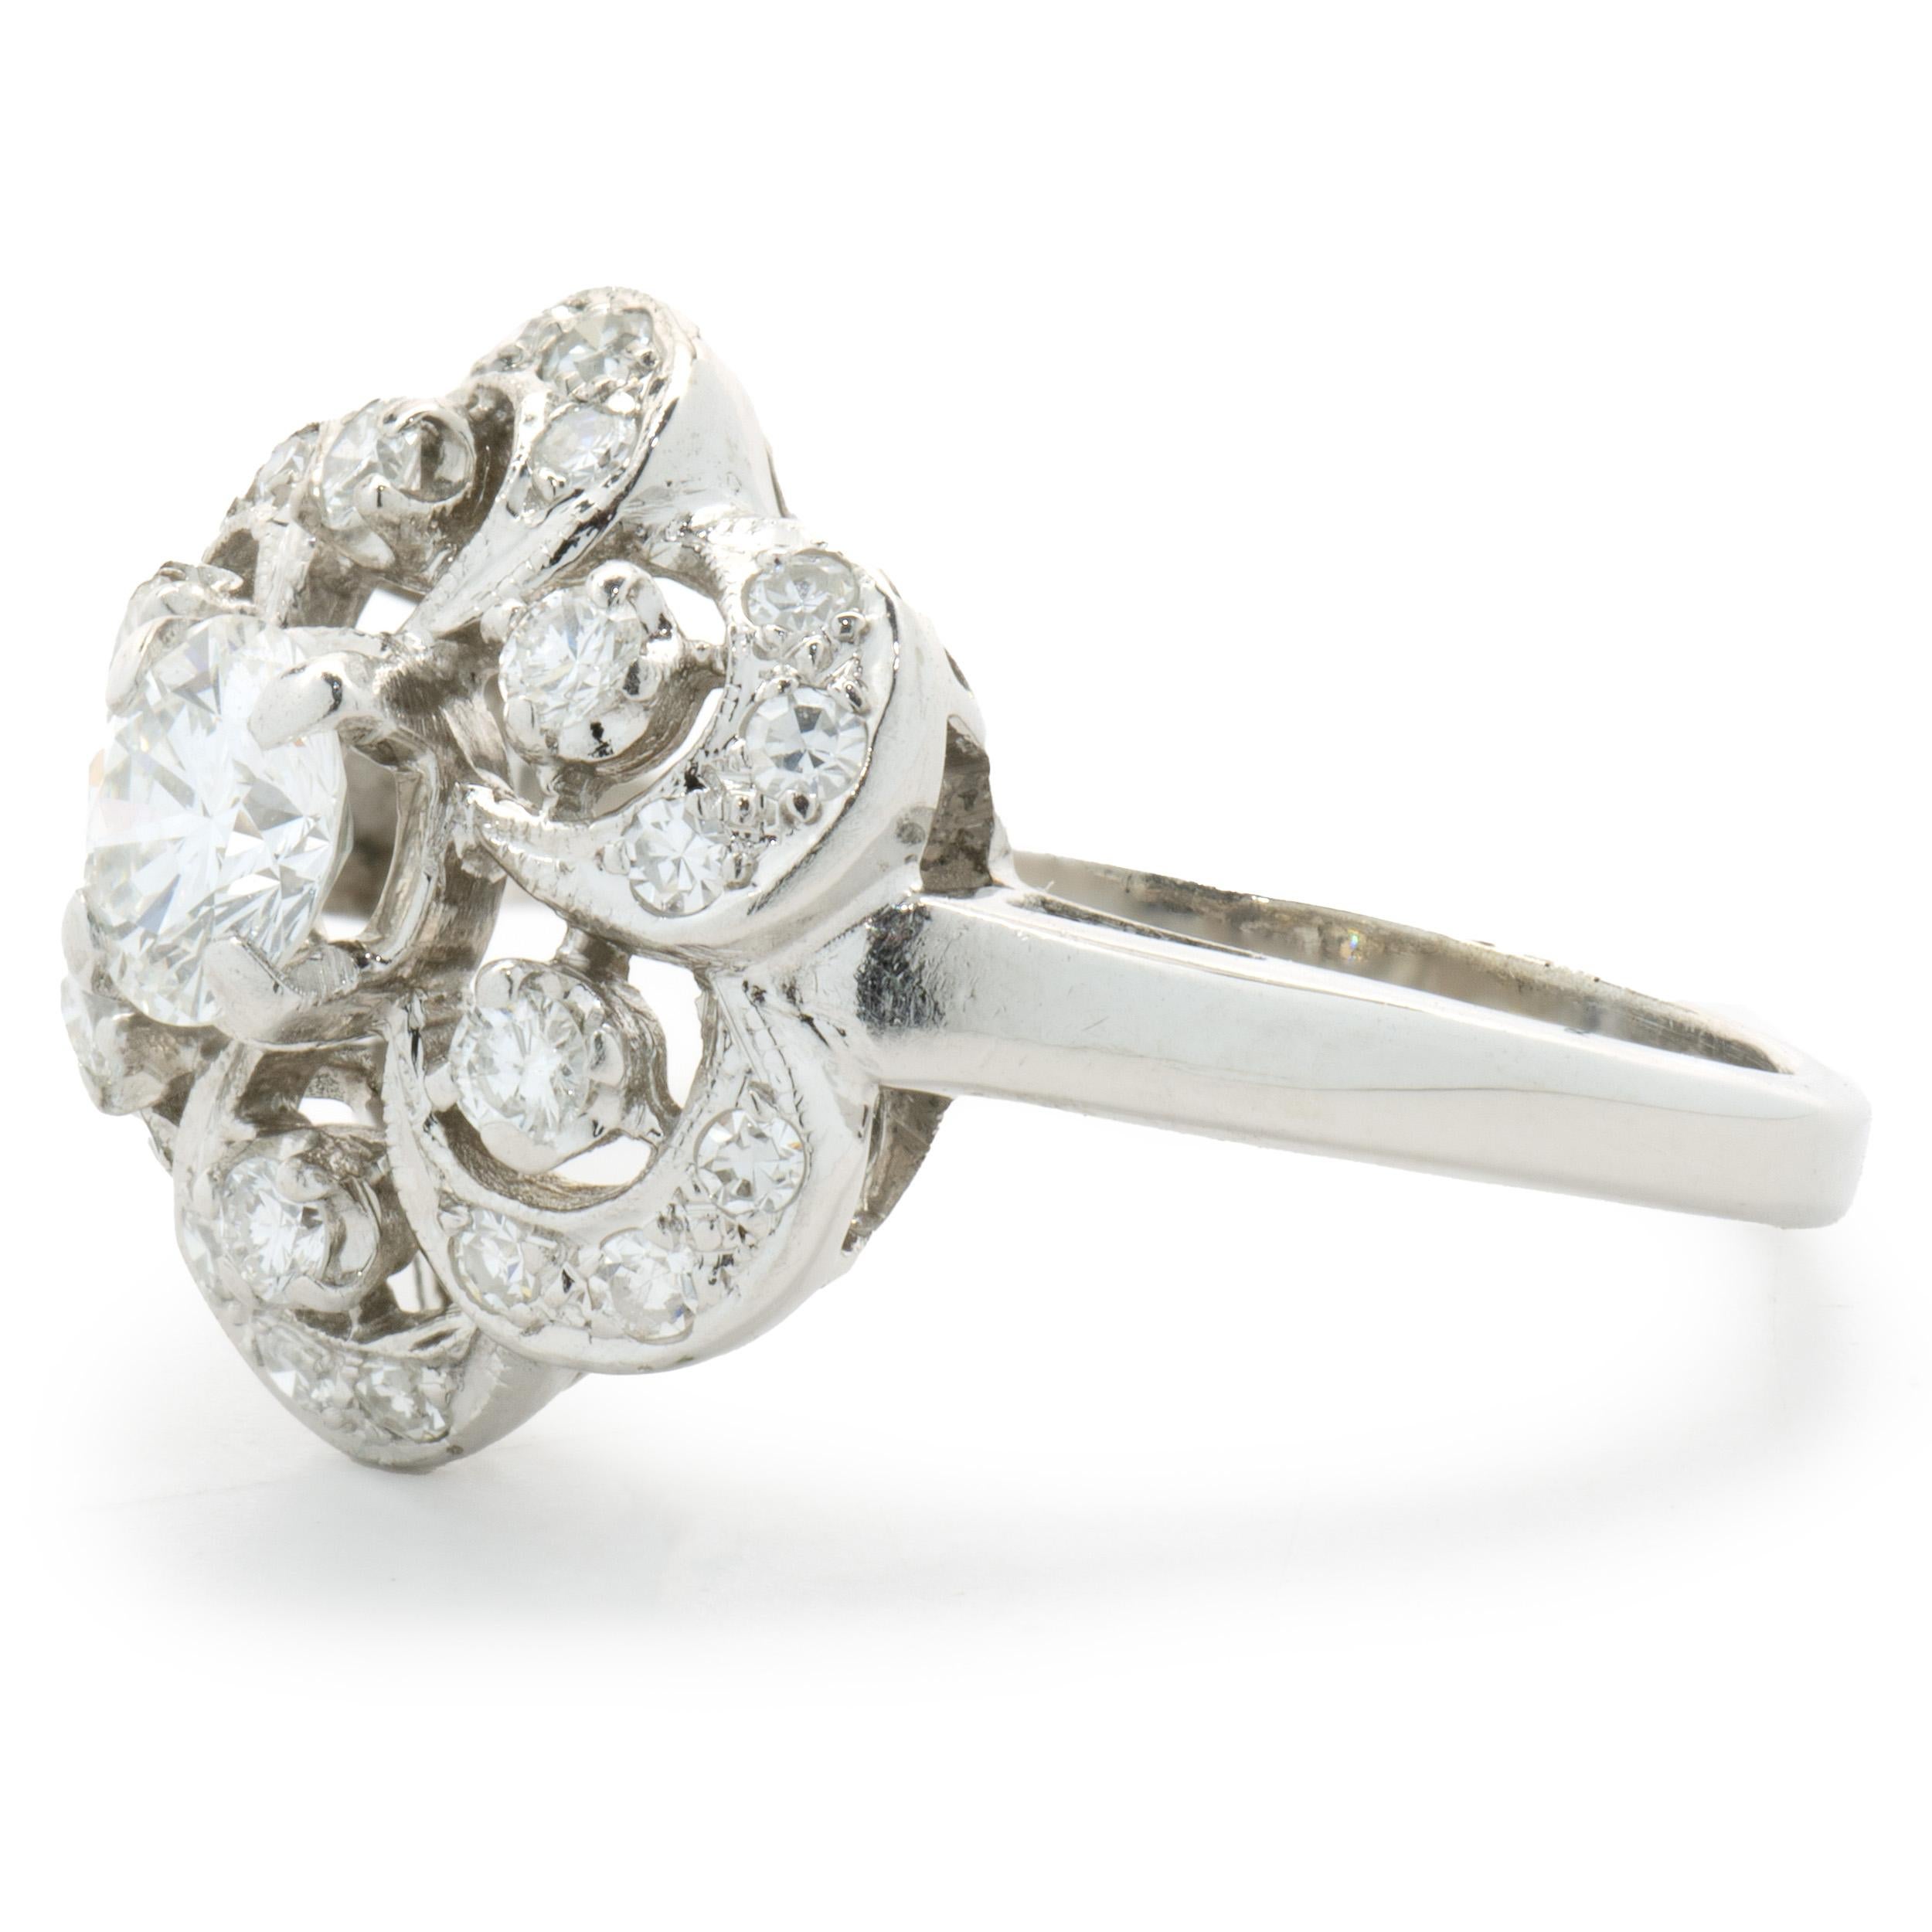 Designer: custom
Material: 14K white gold
Diamond: 1 round brilliant cut = 0.50ct
Color: H
Clarity: SI1
Diamond: 24 round cut = 0.36cttw
Color: G
Clarity: SI1
Size: 6.5 complimentary sizing available 
Weight: 4.34 grams